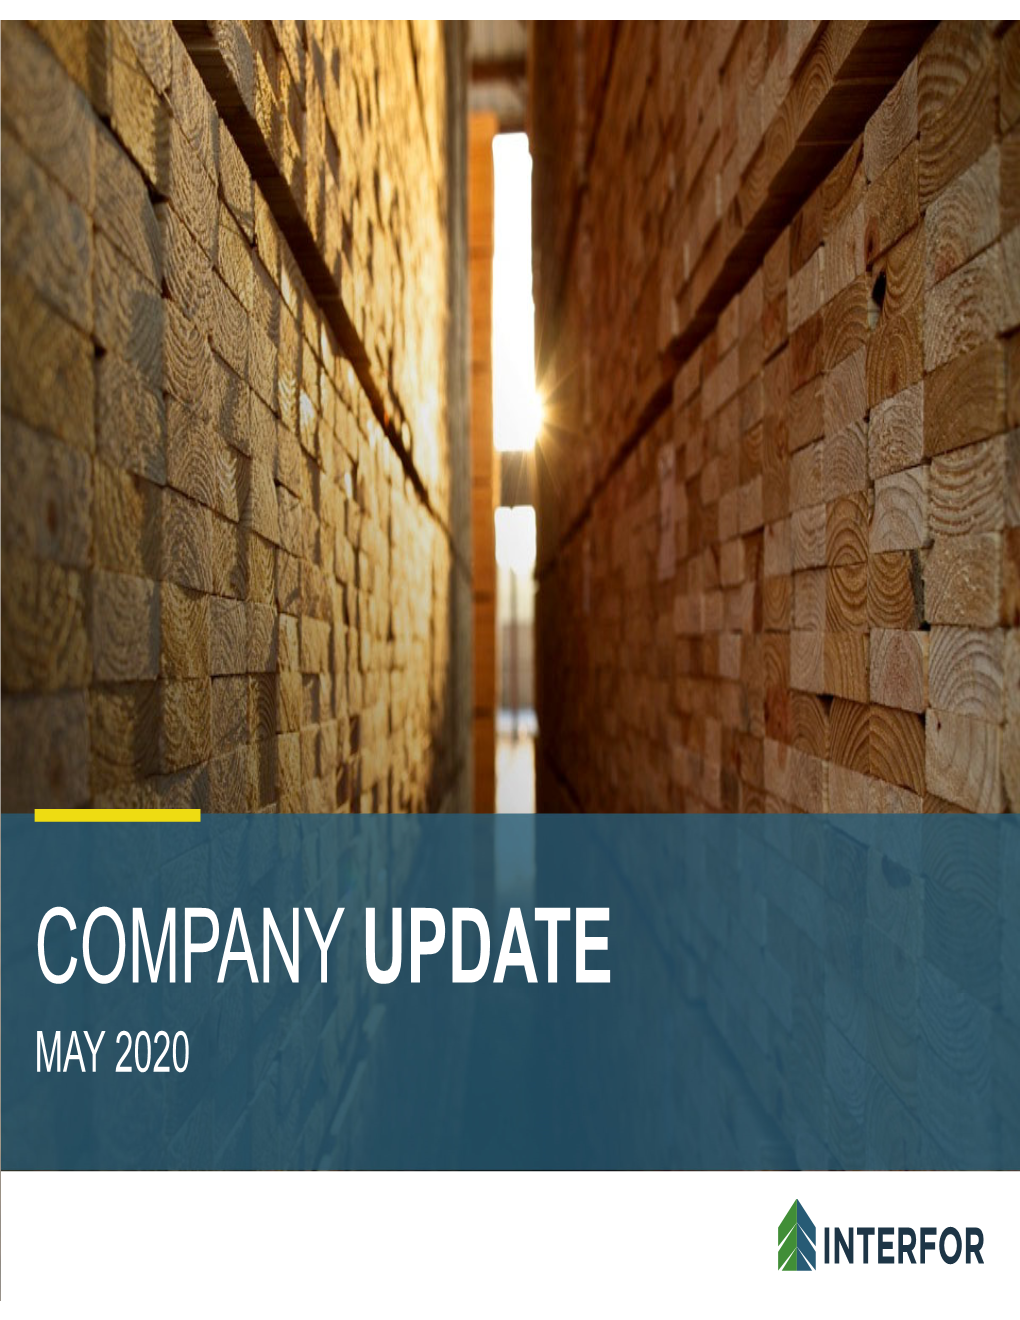 Company Update May 2020 Forward-Looking Information & Non-Gaap Measures